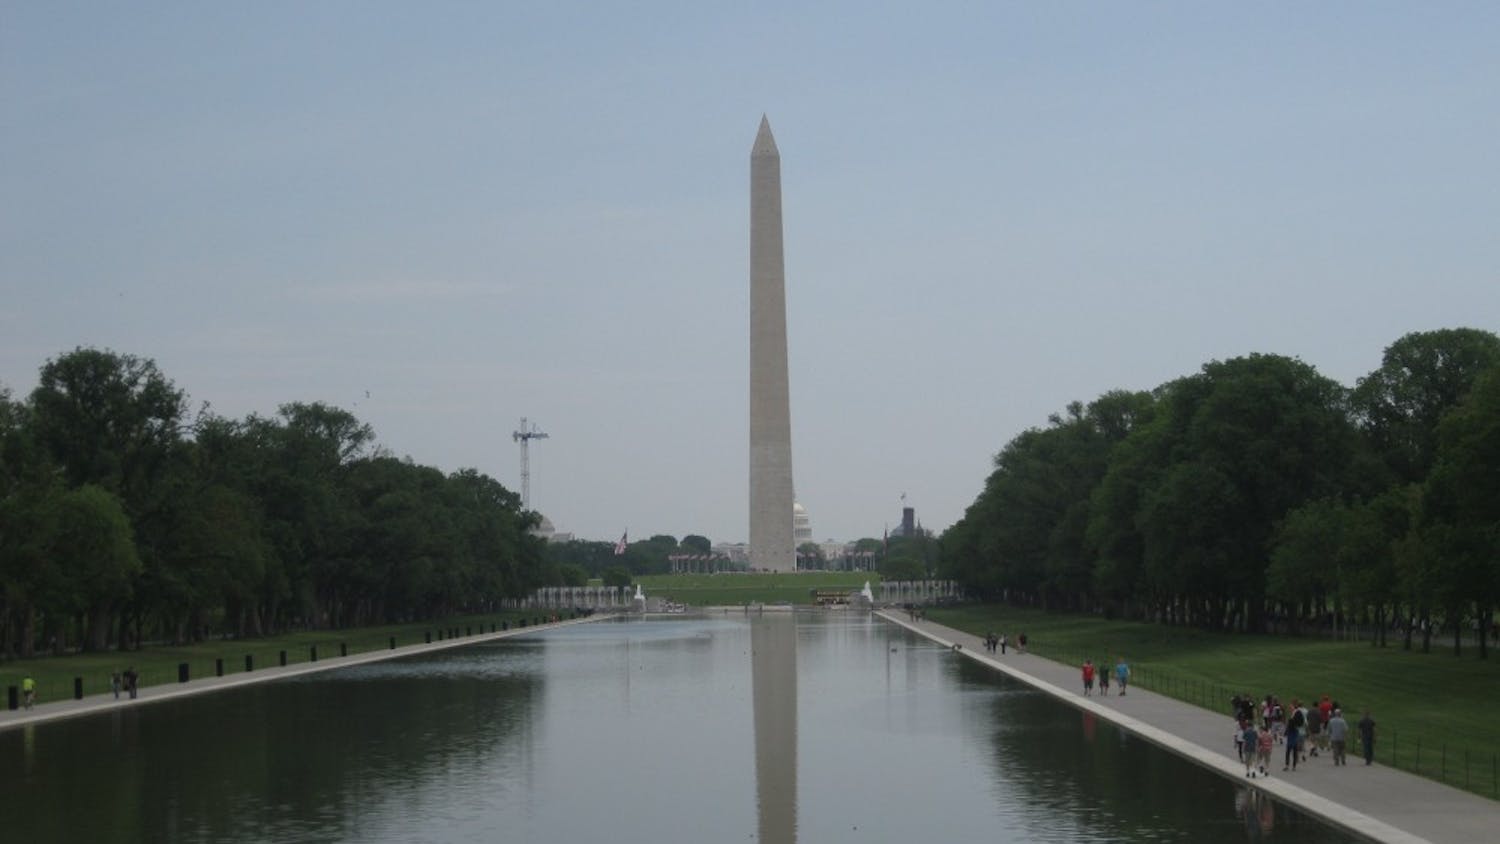 	A view of the Washington Monument from the Lincoln Memorial Reflecting Pool.